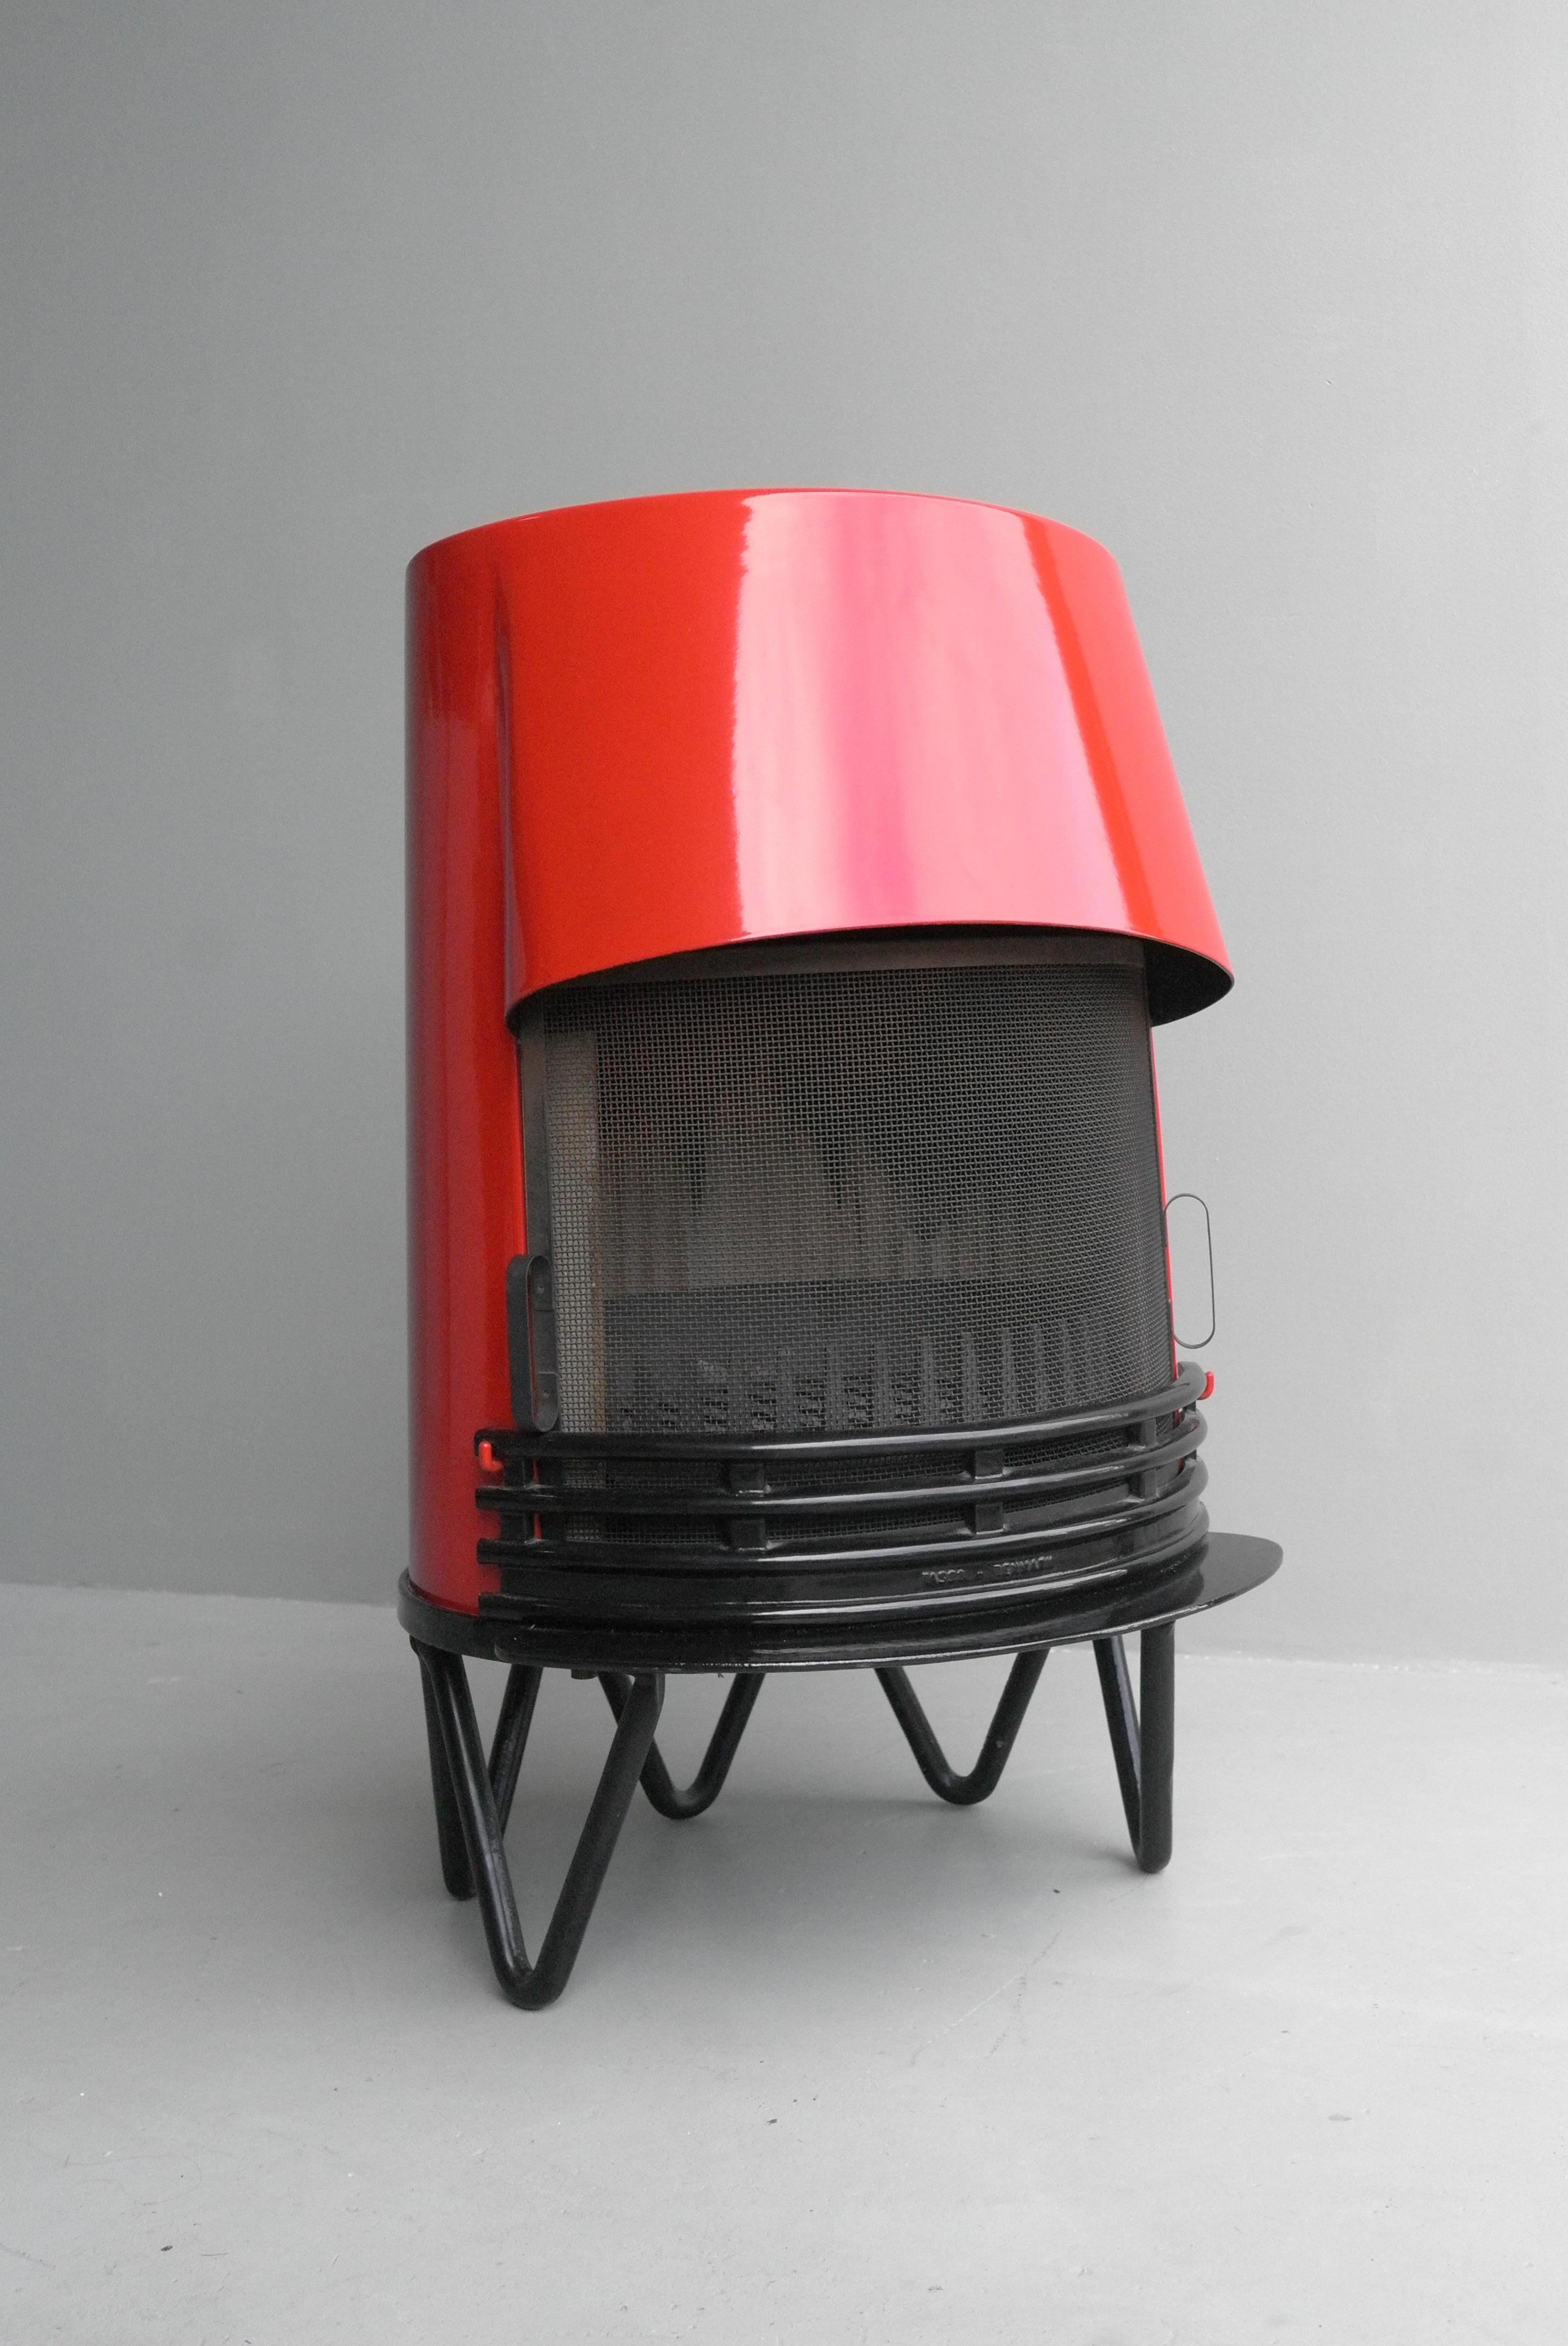 Rare red enameled midcentury Danish fireplace designed by architectural firm Hoff & Windinge for Tasso Denmark, circa 1942. This fireplace has the ORIGINAL removable grate with two handles (one each side), Hairpin legs marked with Tasso Denmark on